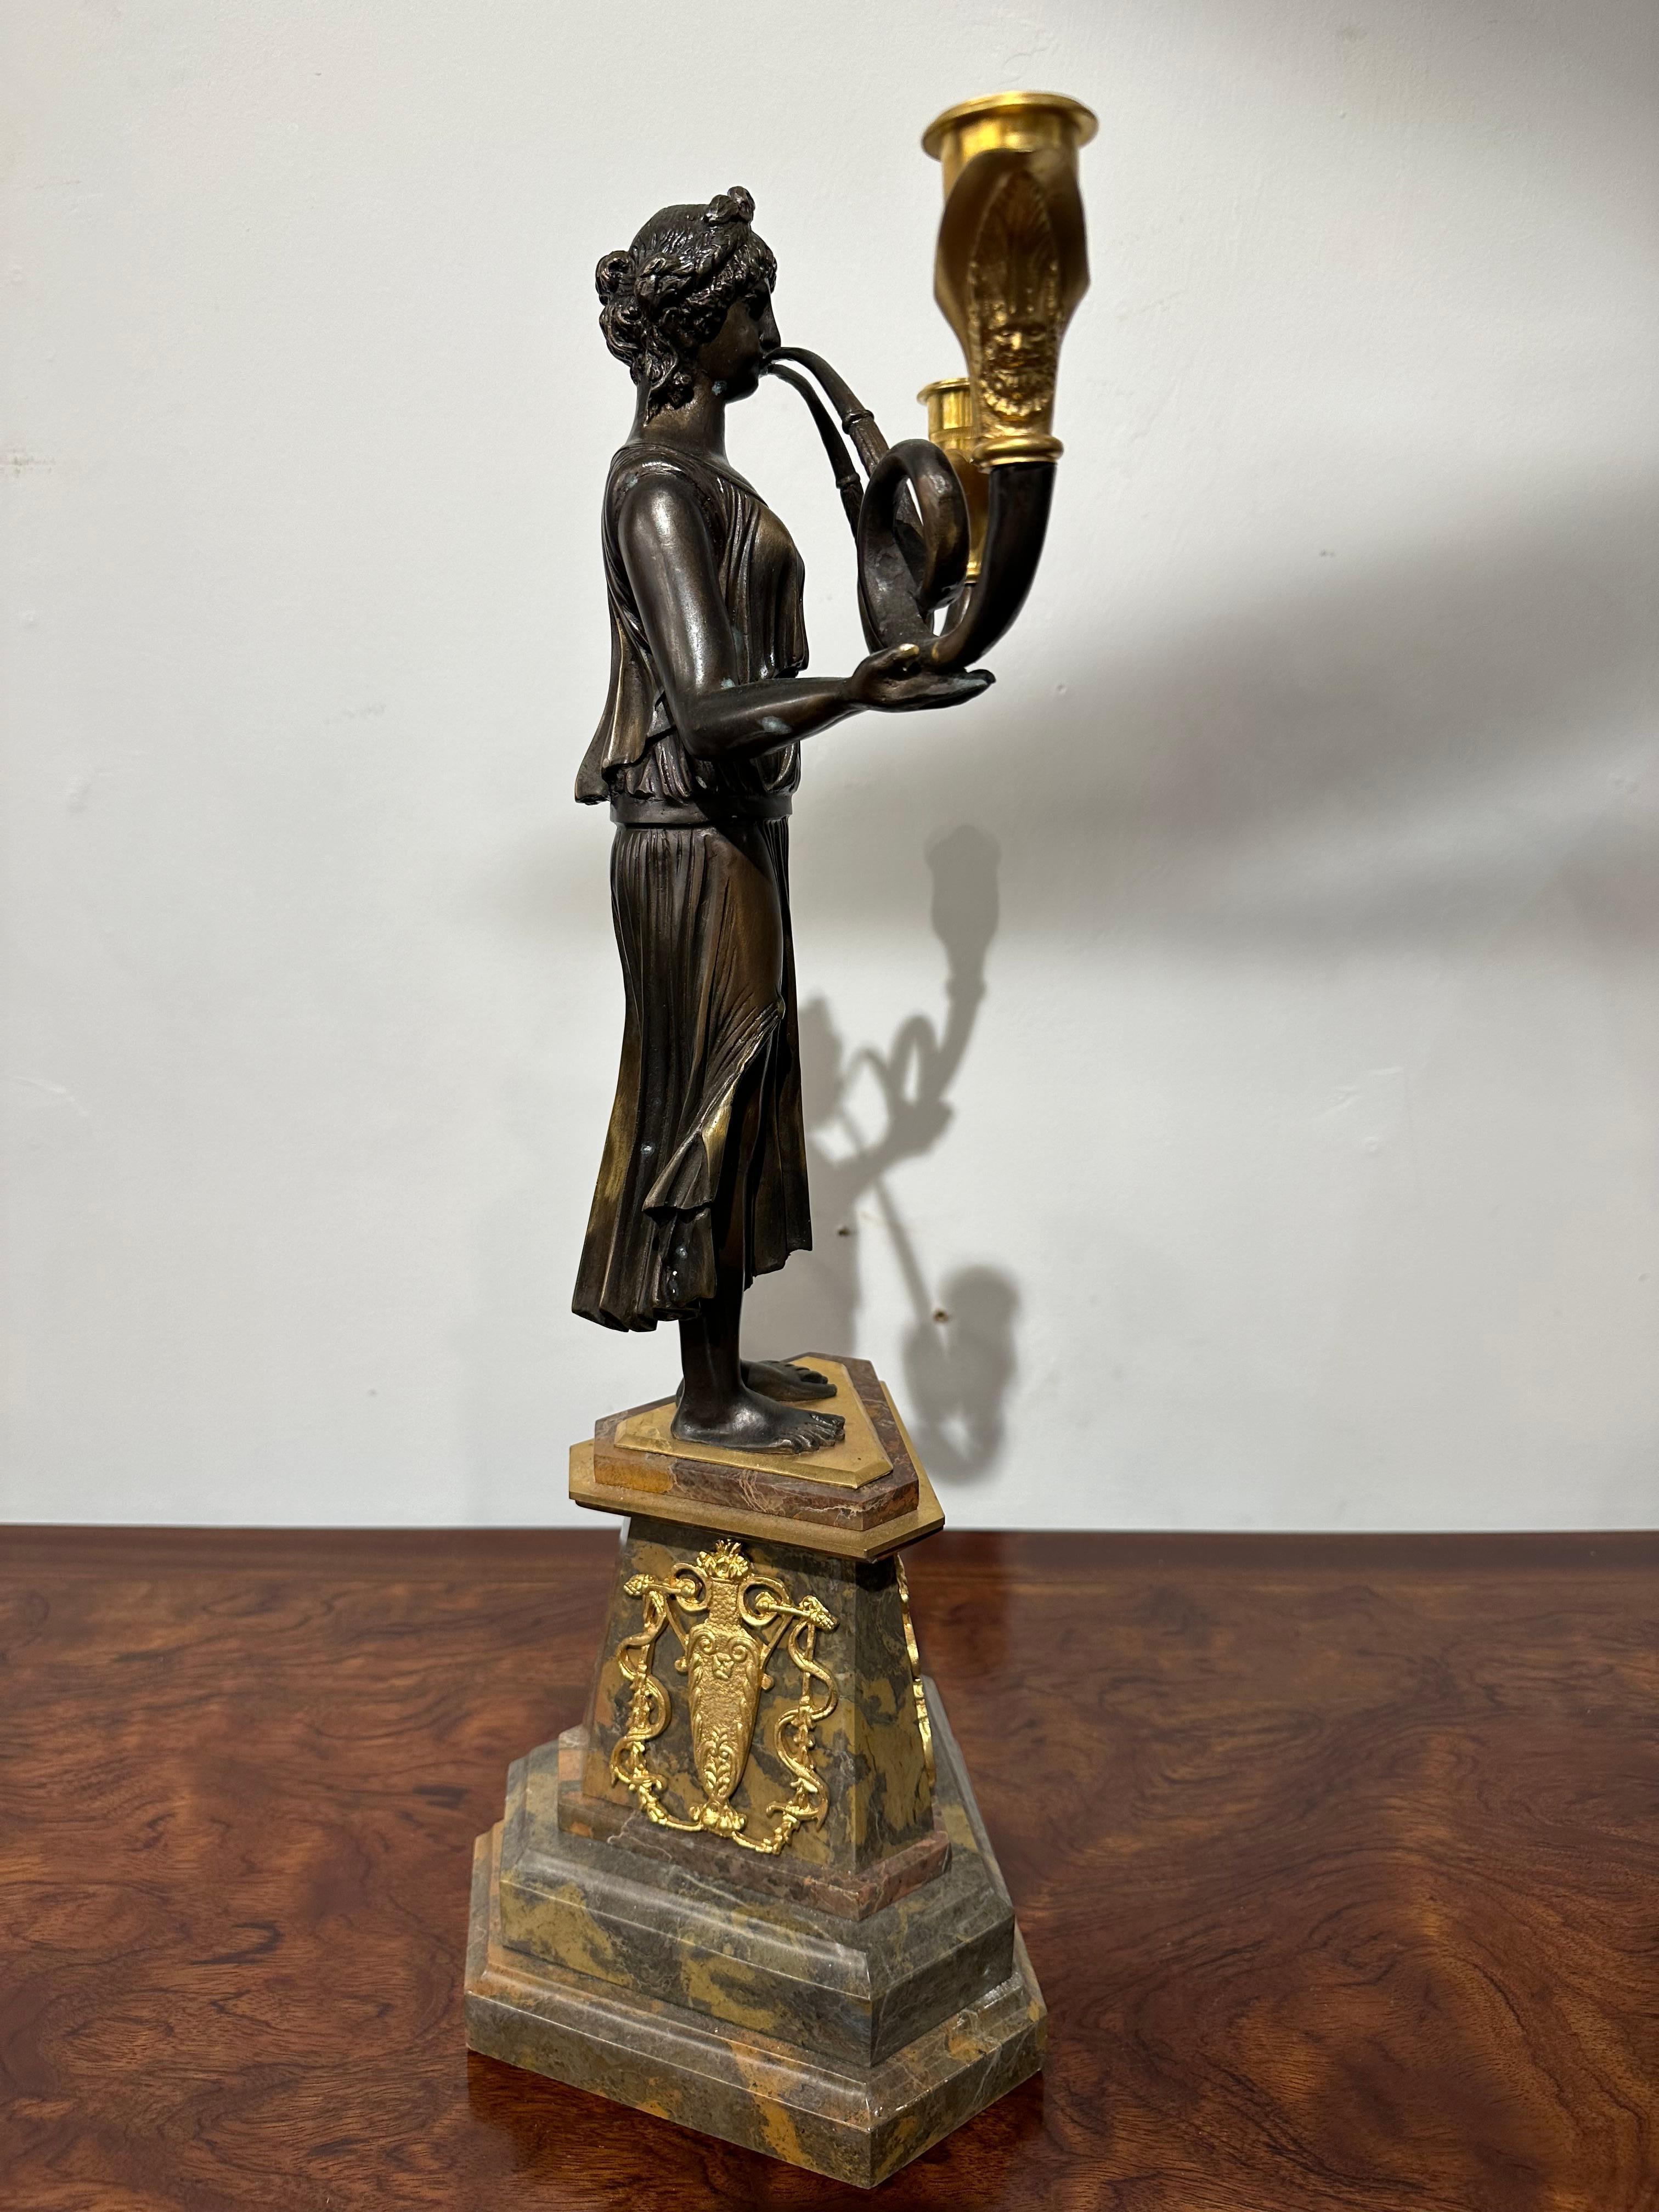 A beautifully made pair of French candelabras in bronze and marble. Two neoclassical styled women are blowing trumpet horns which form candlesticks. There is intricate detailing to their clothing and hair. Their faces are clearly depicted. A lovely